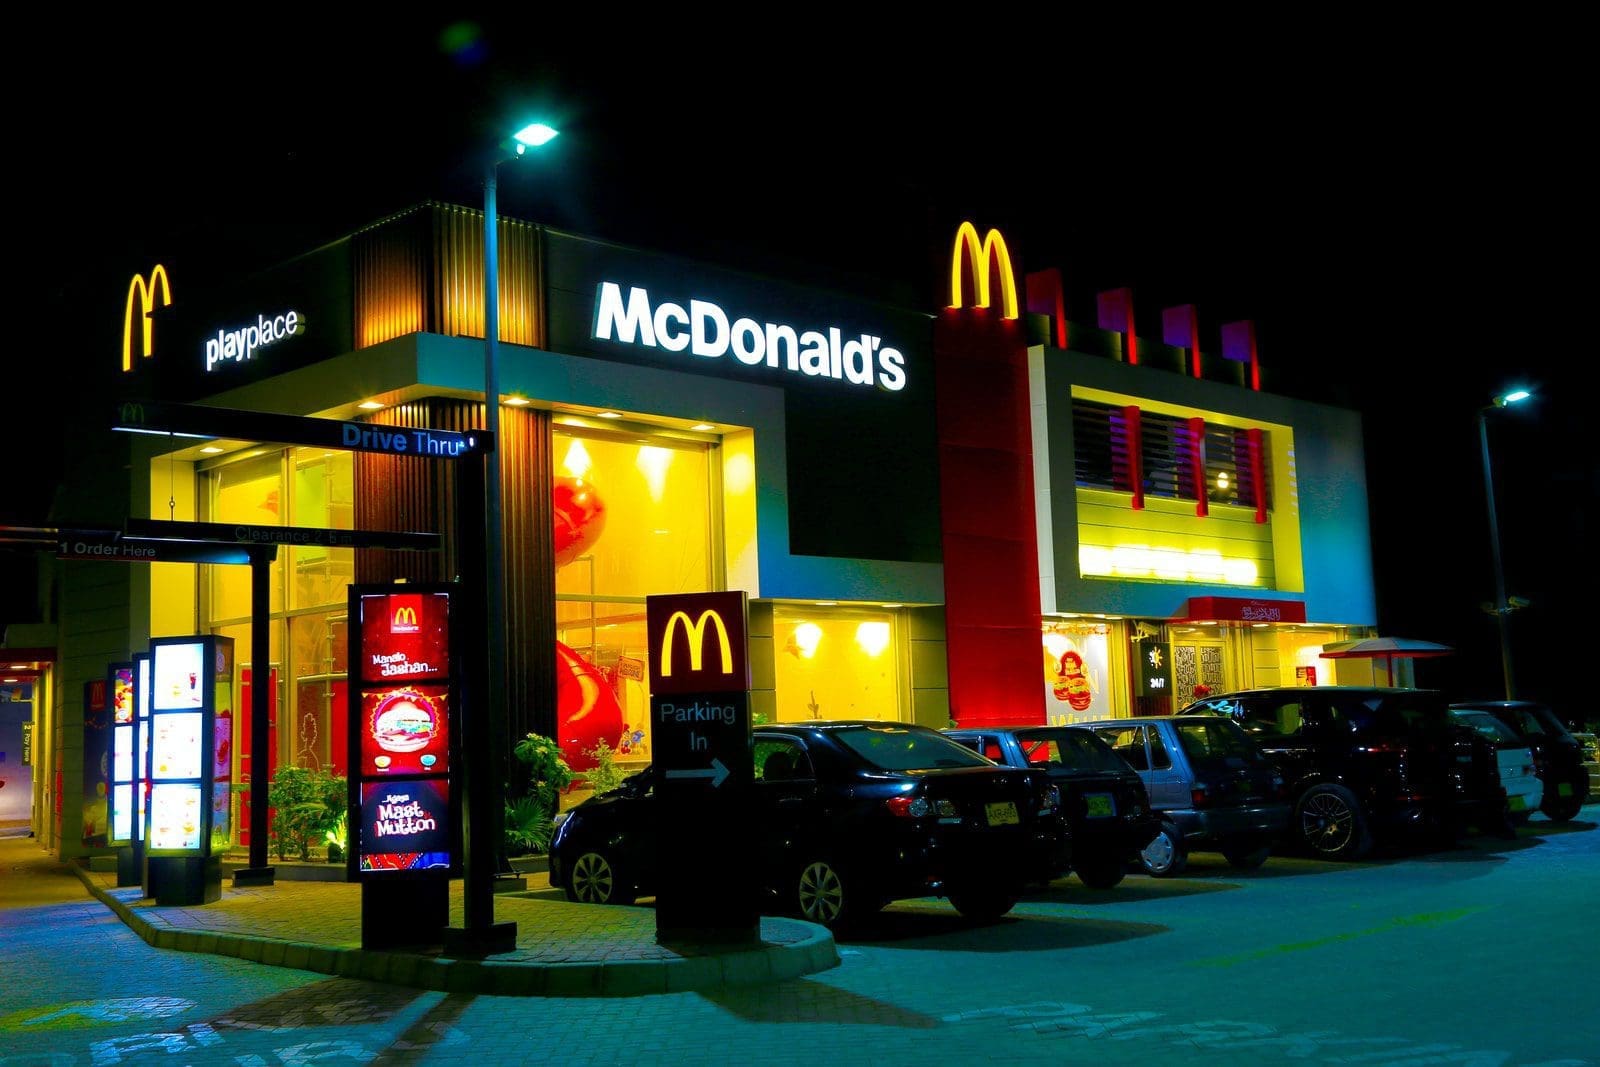 McDonald's cars parked in front of UNKs restaurant during night time